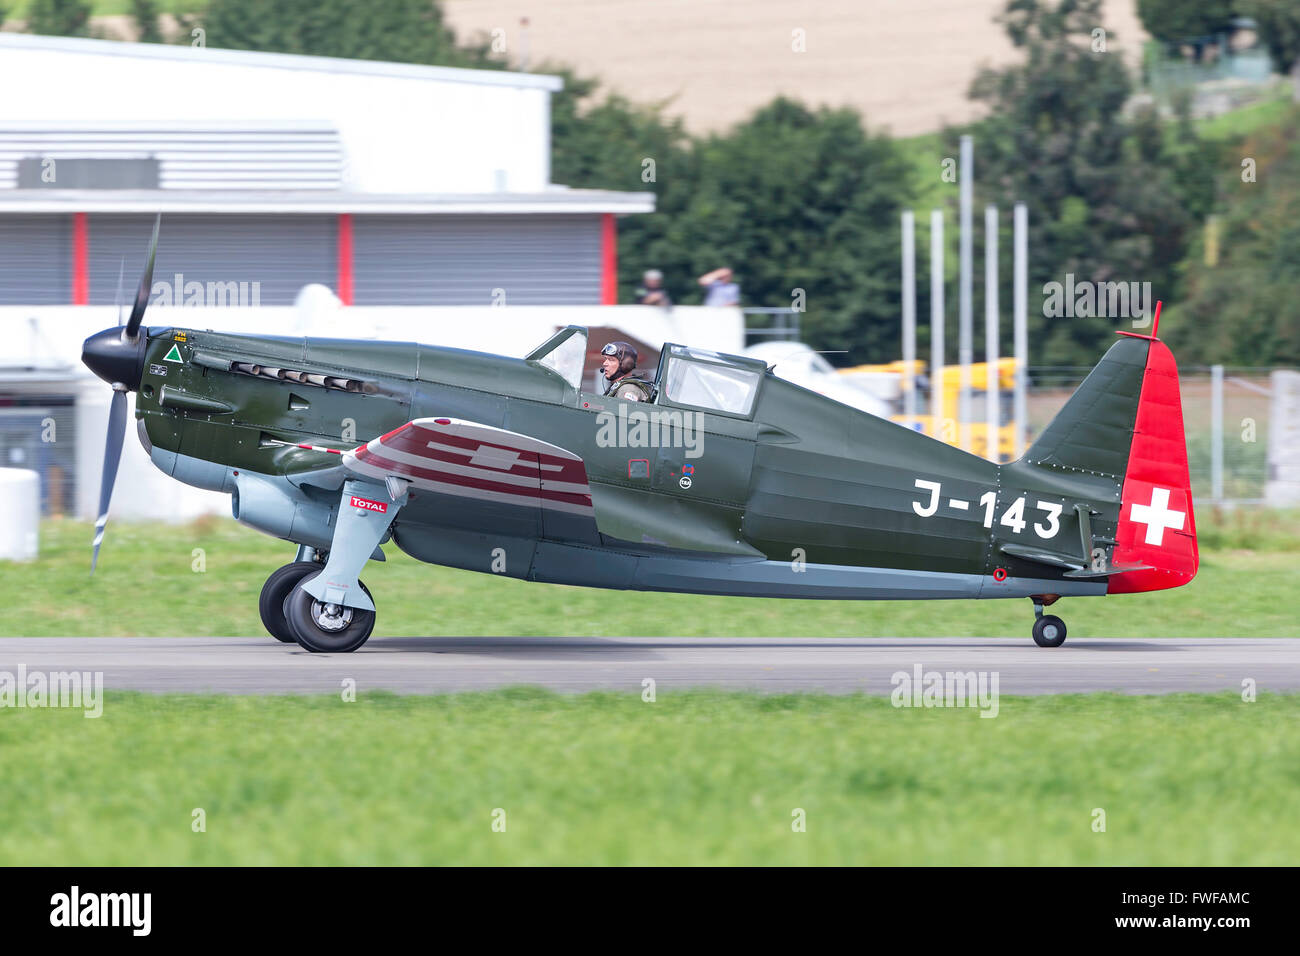 Morane-Saulnier D-3801 HB-RCF is a French built fighter aircraft from World War II. This example operated by the Swiss Air Force Stock Photo